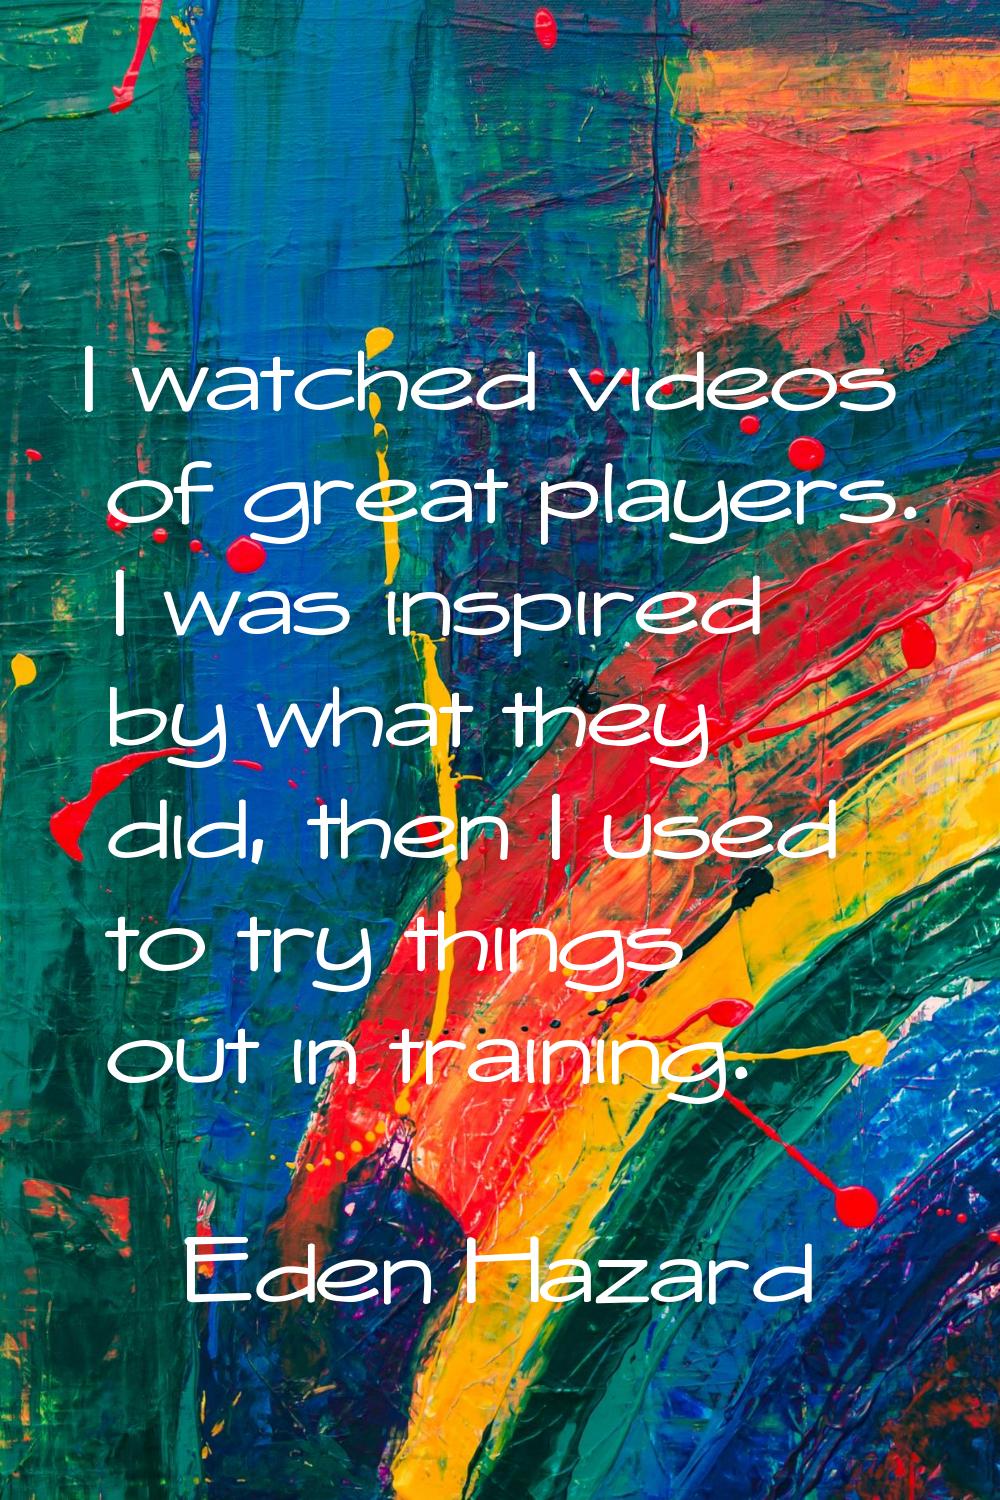 I watched videos of great players. I was inspired by what they did, then I used to try things out i